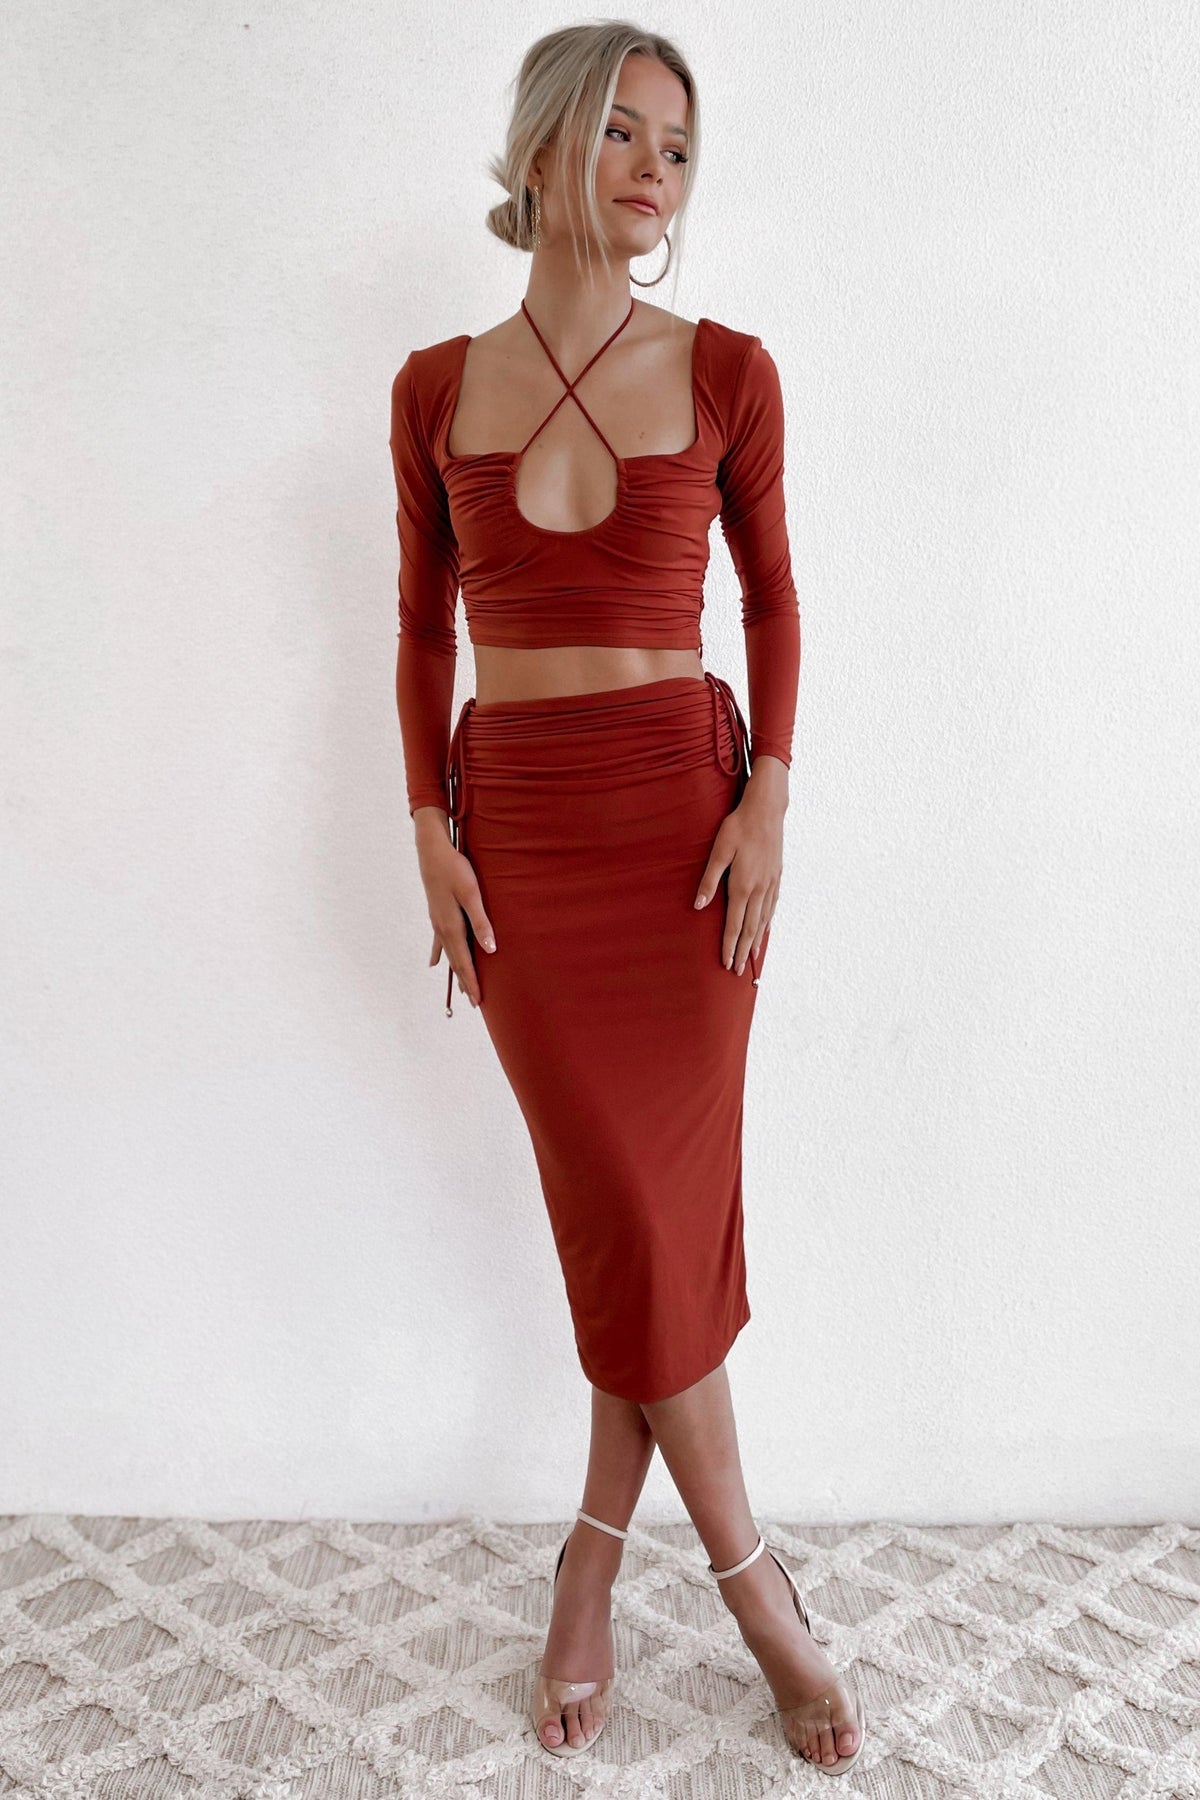 Heavenly Skirt, BOTTOMS, MIDI SKIRT, RED, Sale, SKIRTS, Shop The Latest Heavenly Skirt Only 60.00 from MISHKAH FASHION:, Our New Heavenly Skirt is only $61.00-We Have The Latest Pants | Shorts | Skirts @ Mishkah Online Fashion Boutique-MISHKAH